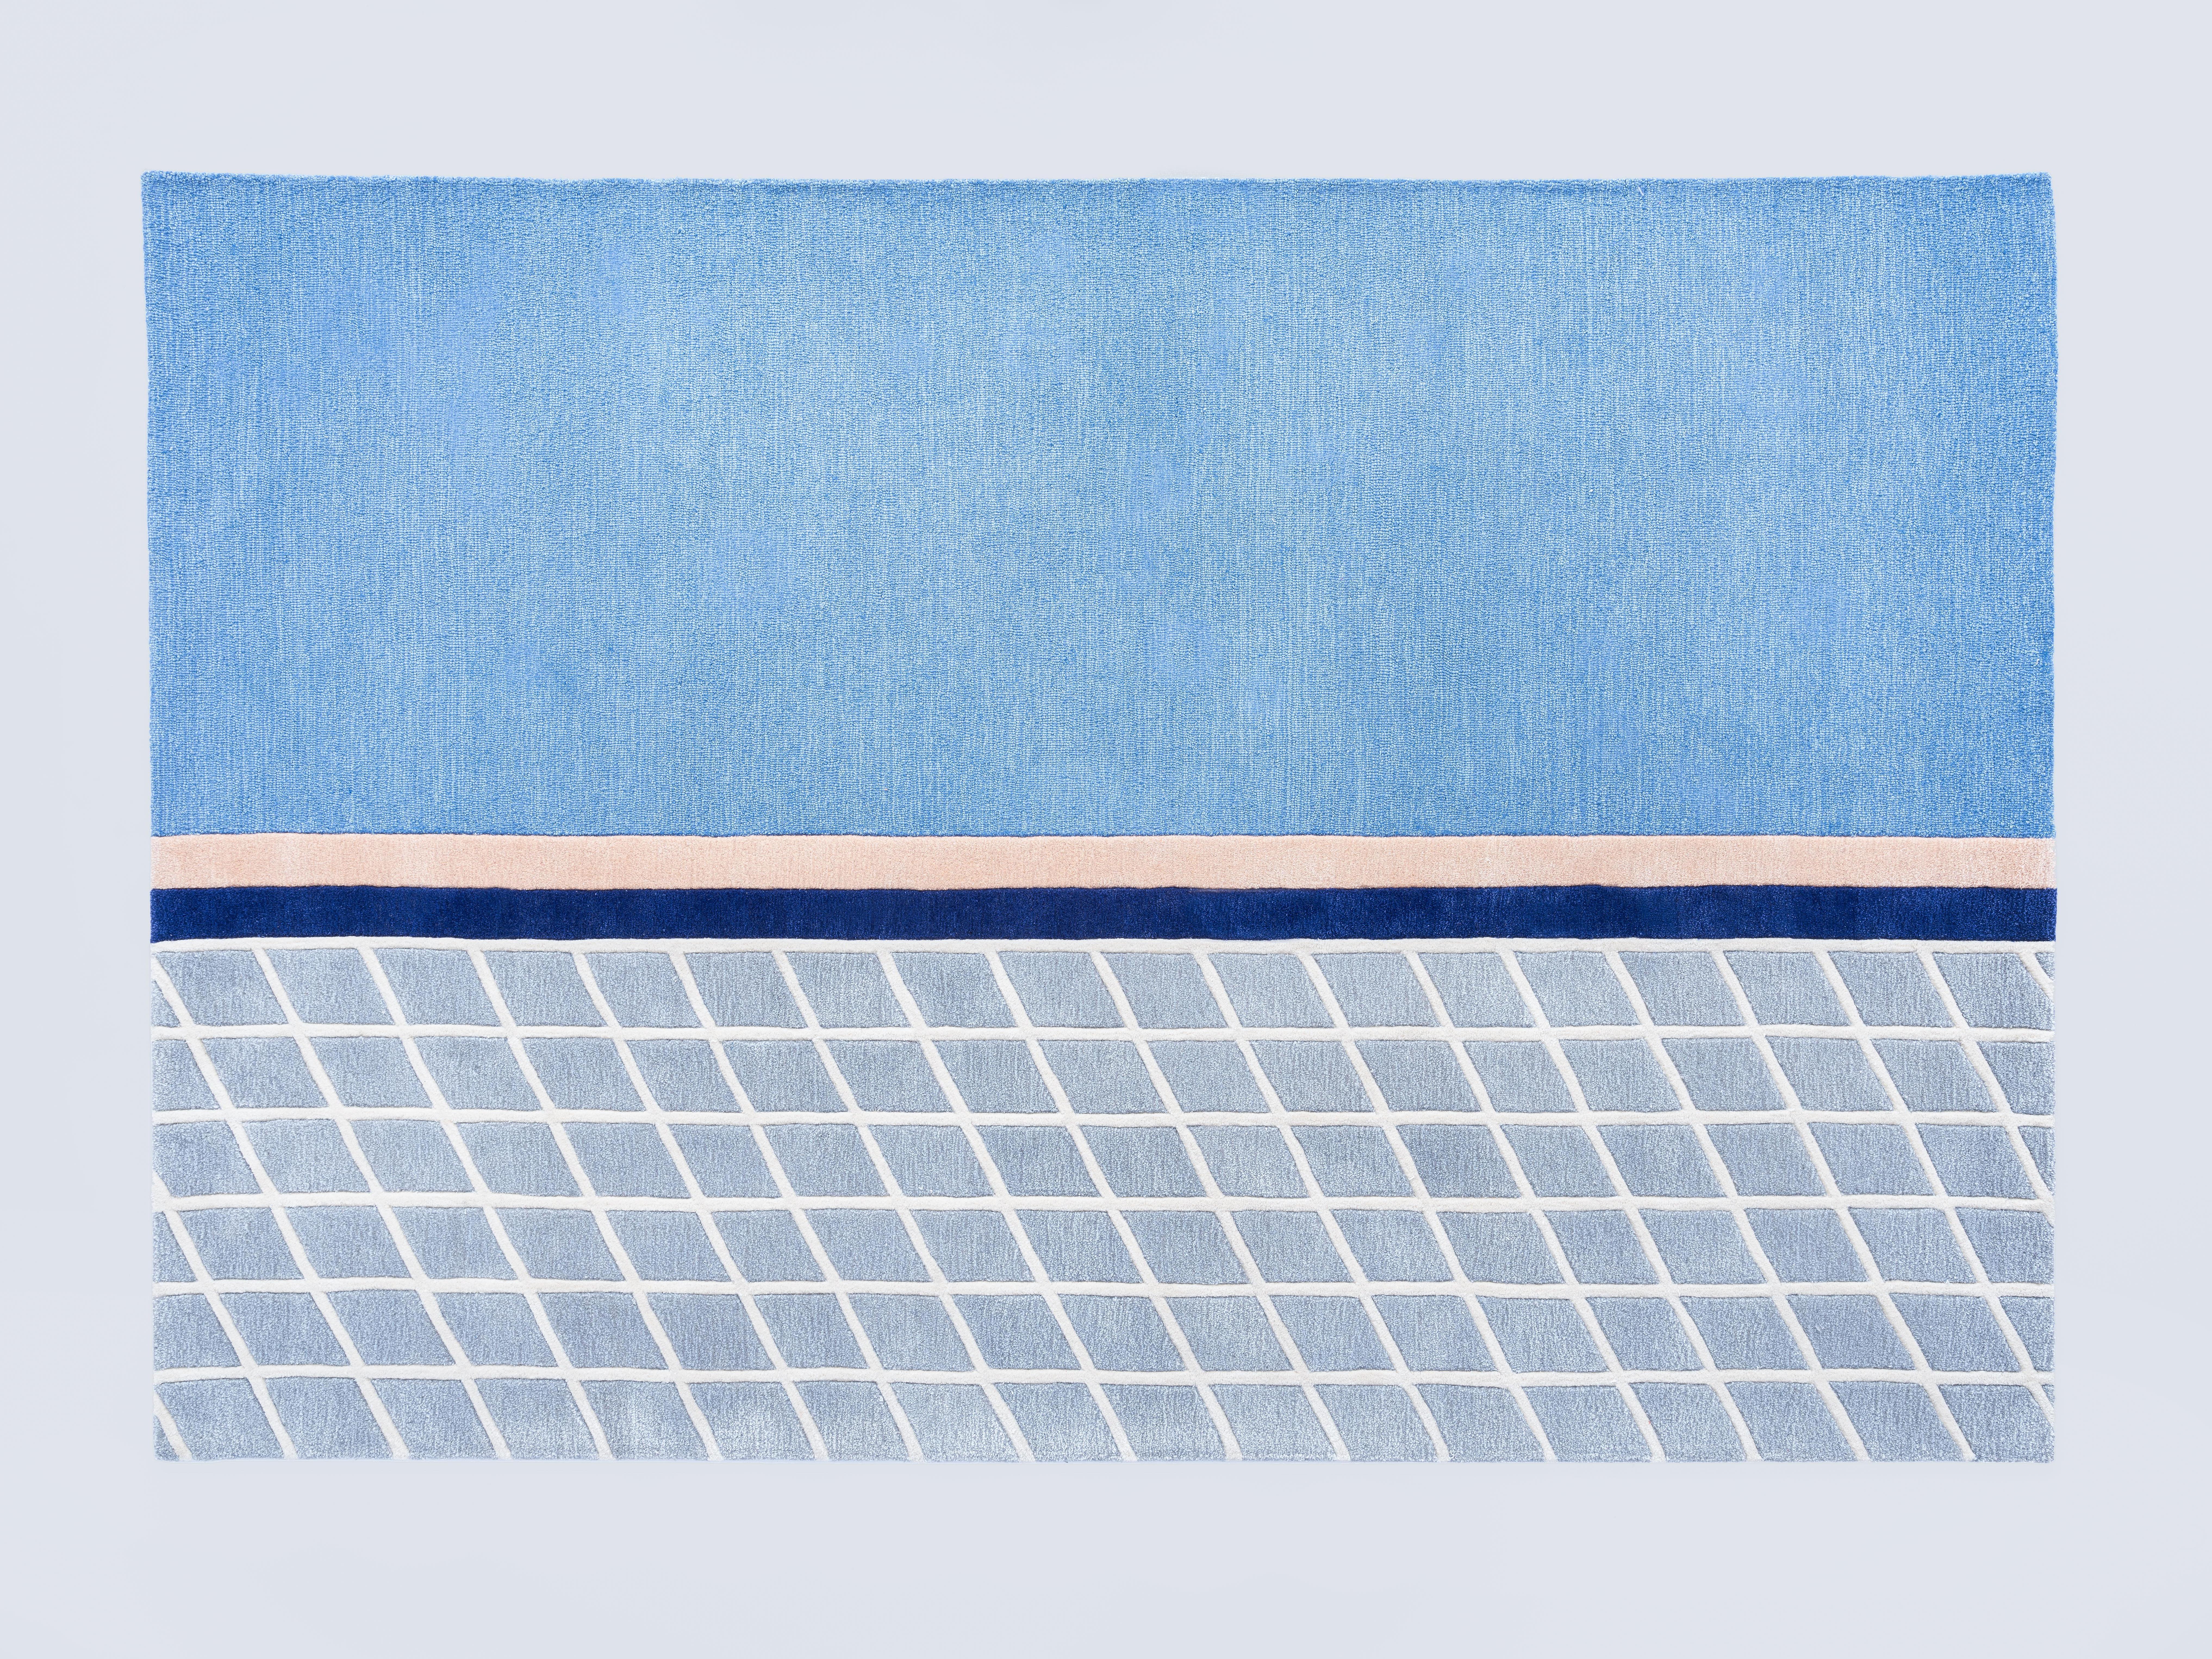 The “Court Series” rugs are hand tufted with blended wool and viscose material dyed in hyper-saturated colors, with tennis court-like geometries represented both via overlaid graphics as well as the cut and shape of individual segments.

Handmade